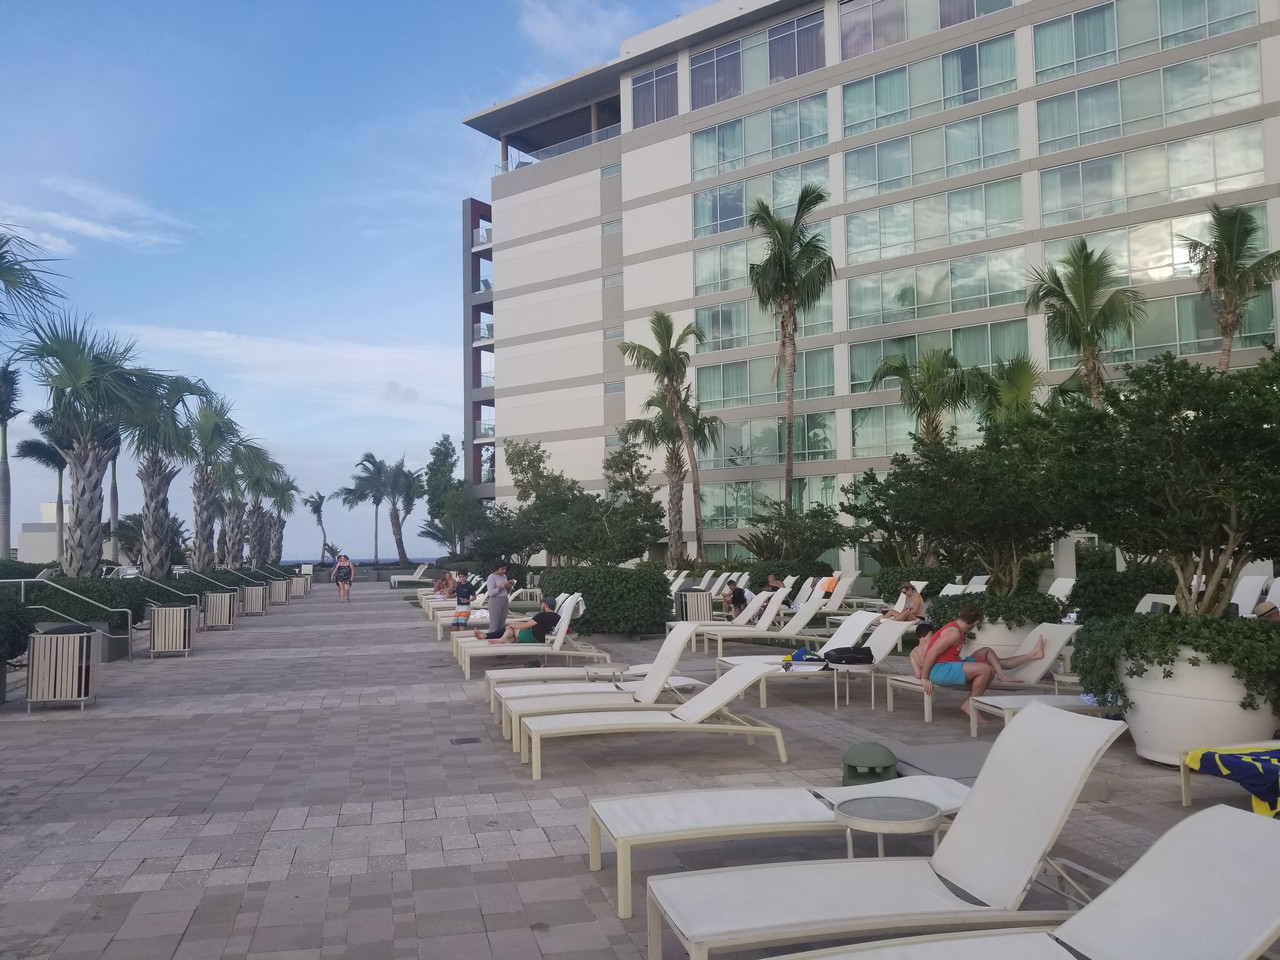 a group of people sitting on lounge chairs outside of a hotel